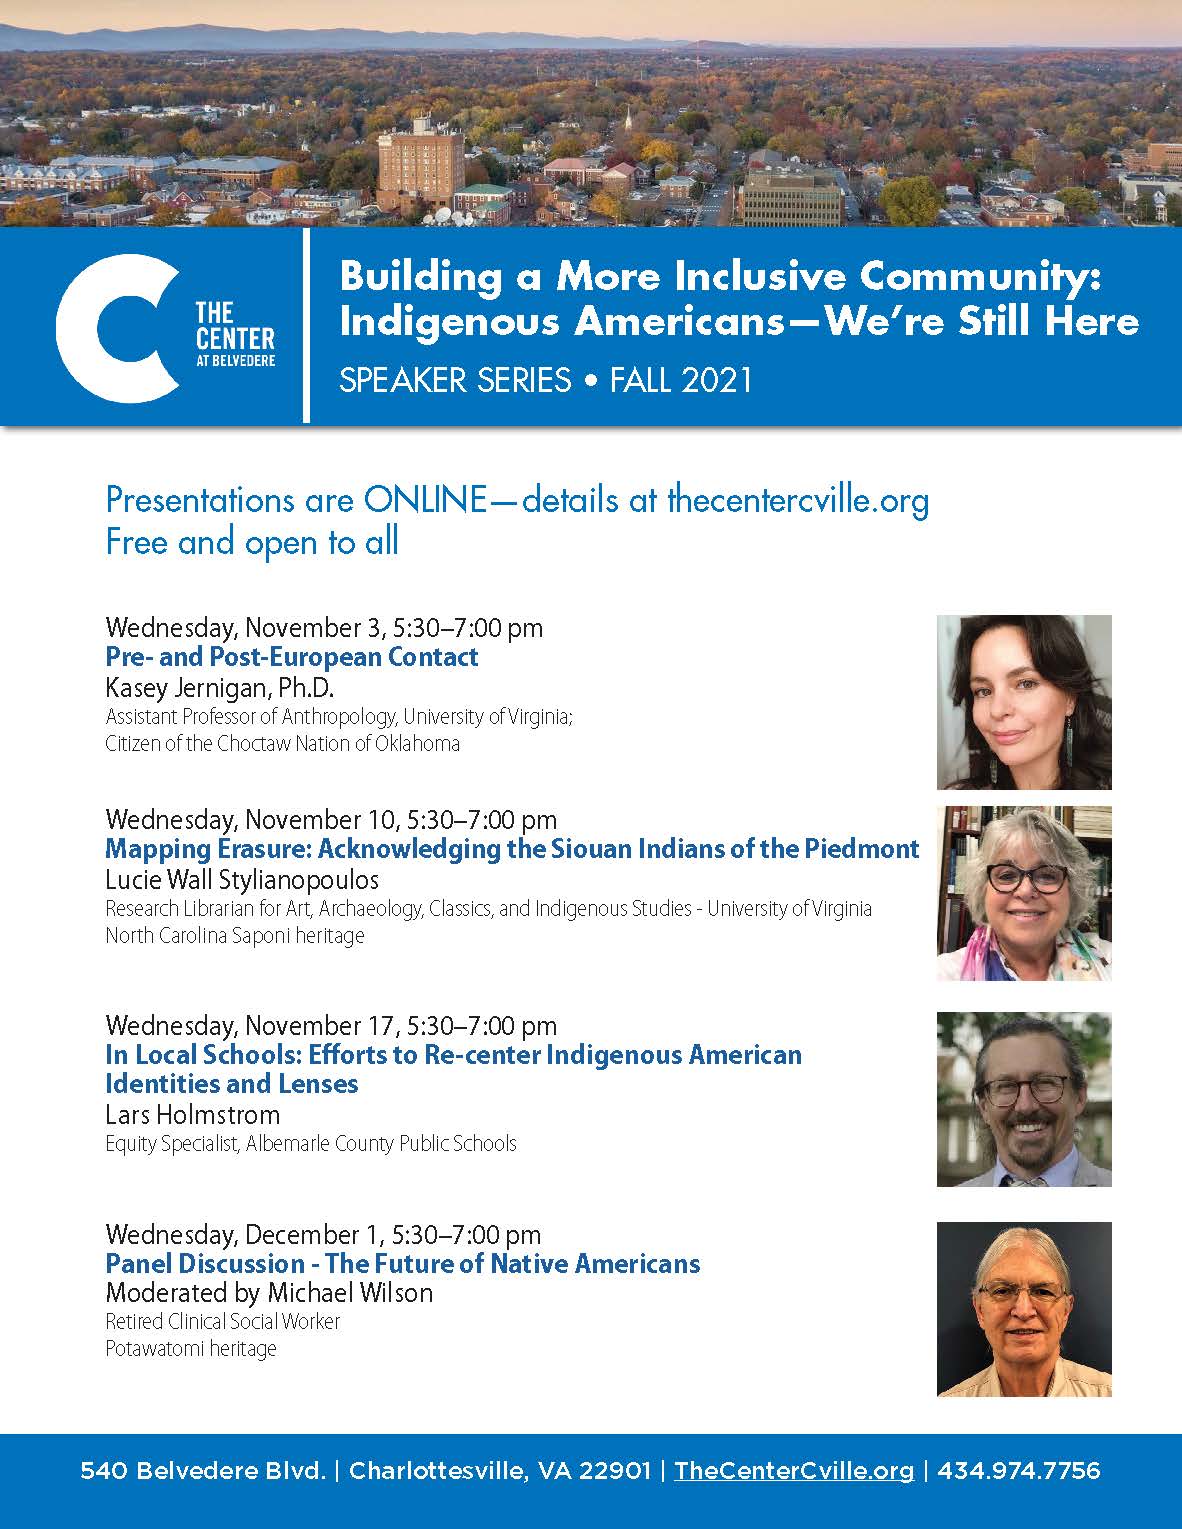 building a more inclusive community: indigenous americans - we're still here speaker series fall 2021